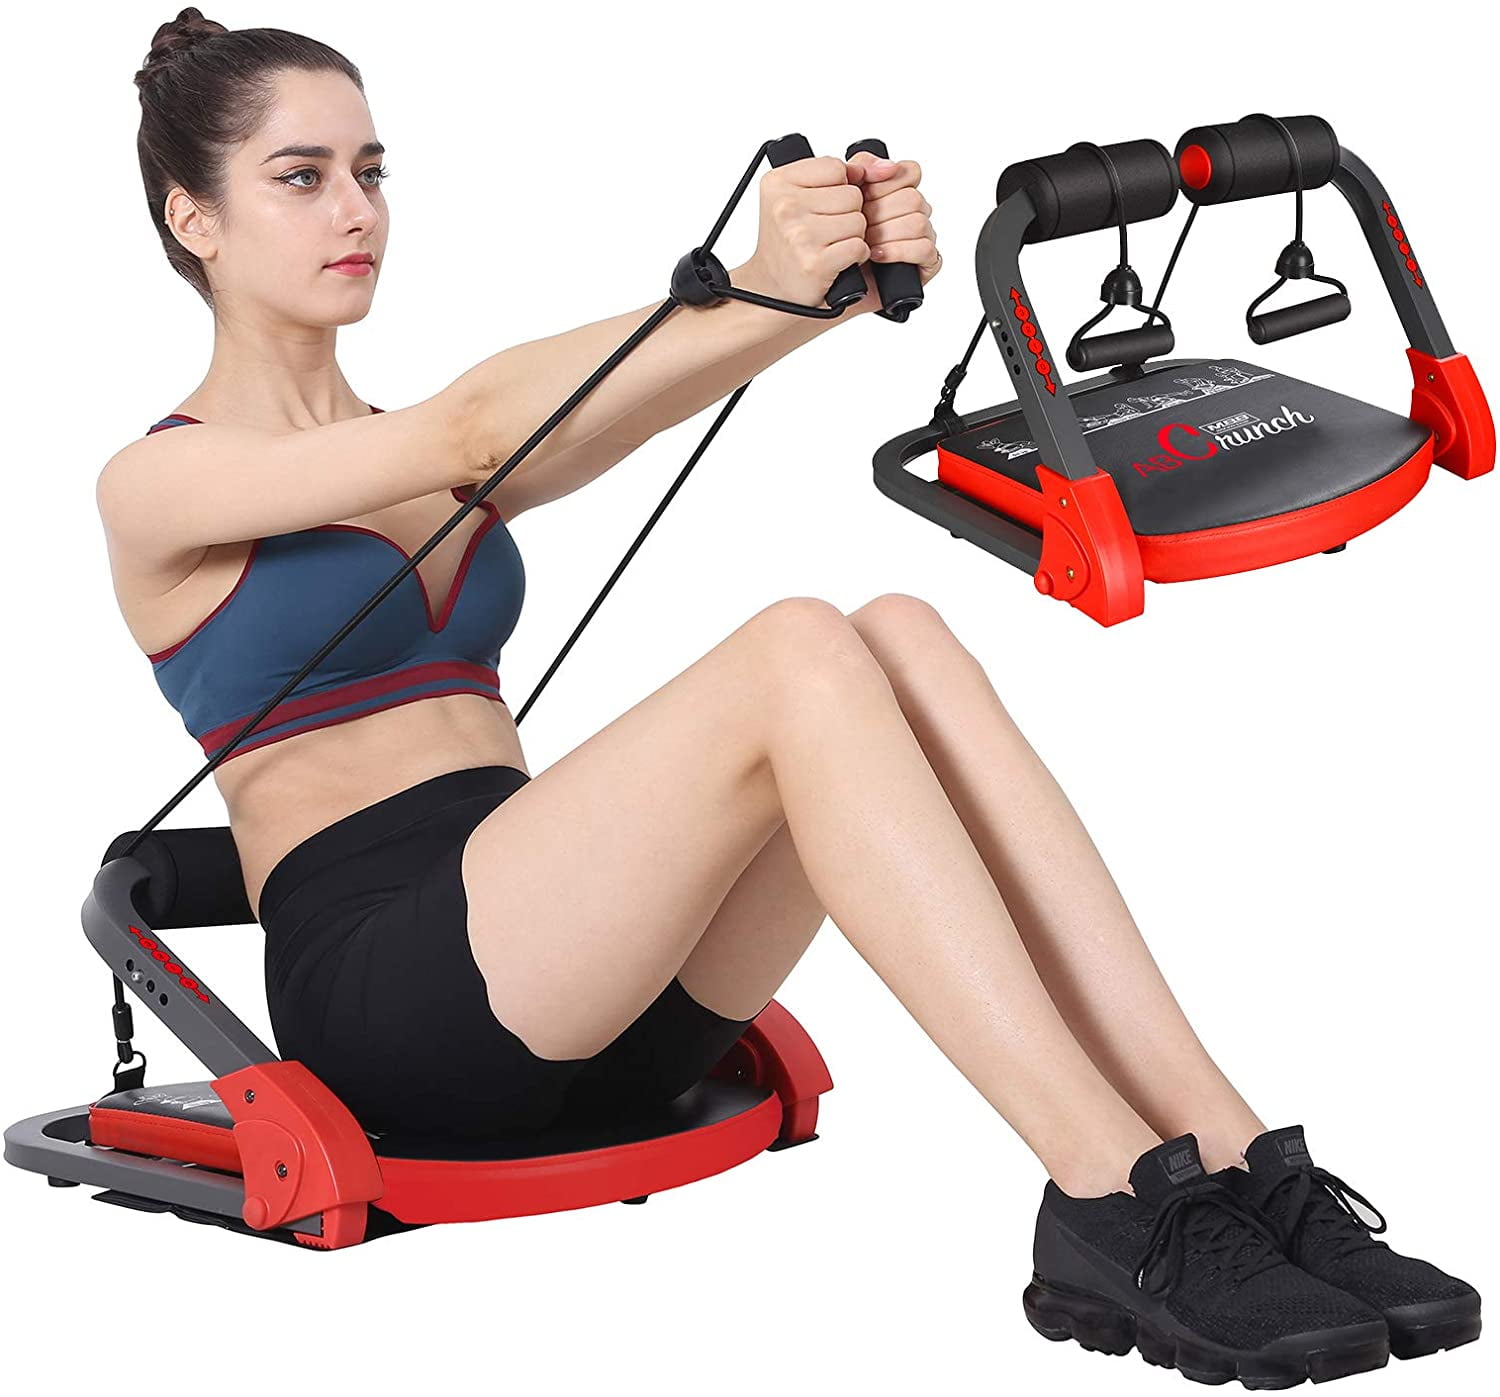 New multi function Rope machine for Fitness Shaping strength exercise indoor Gym 